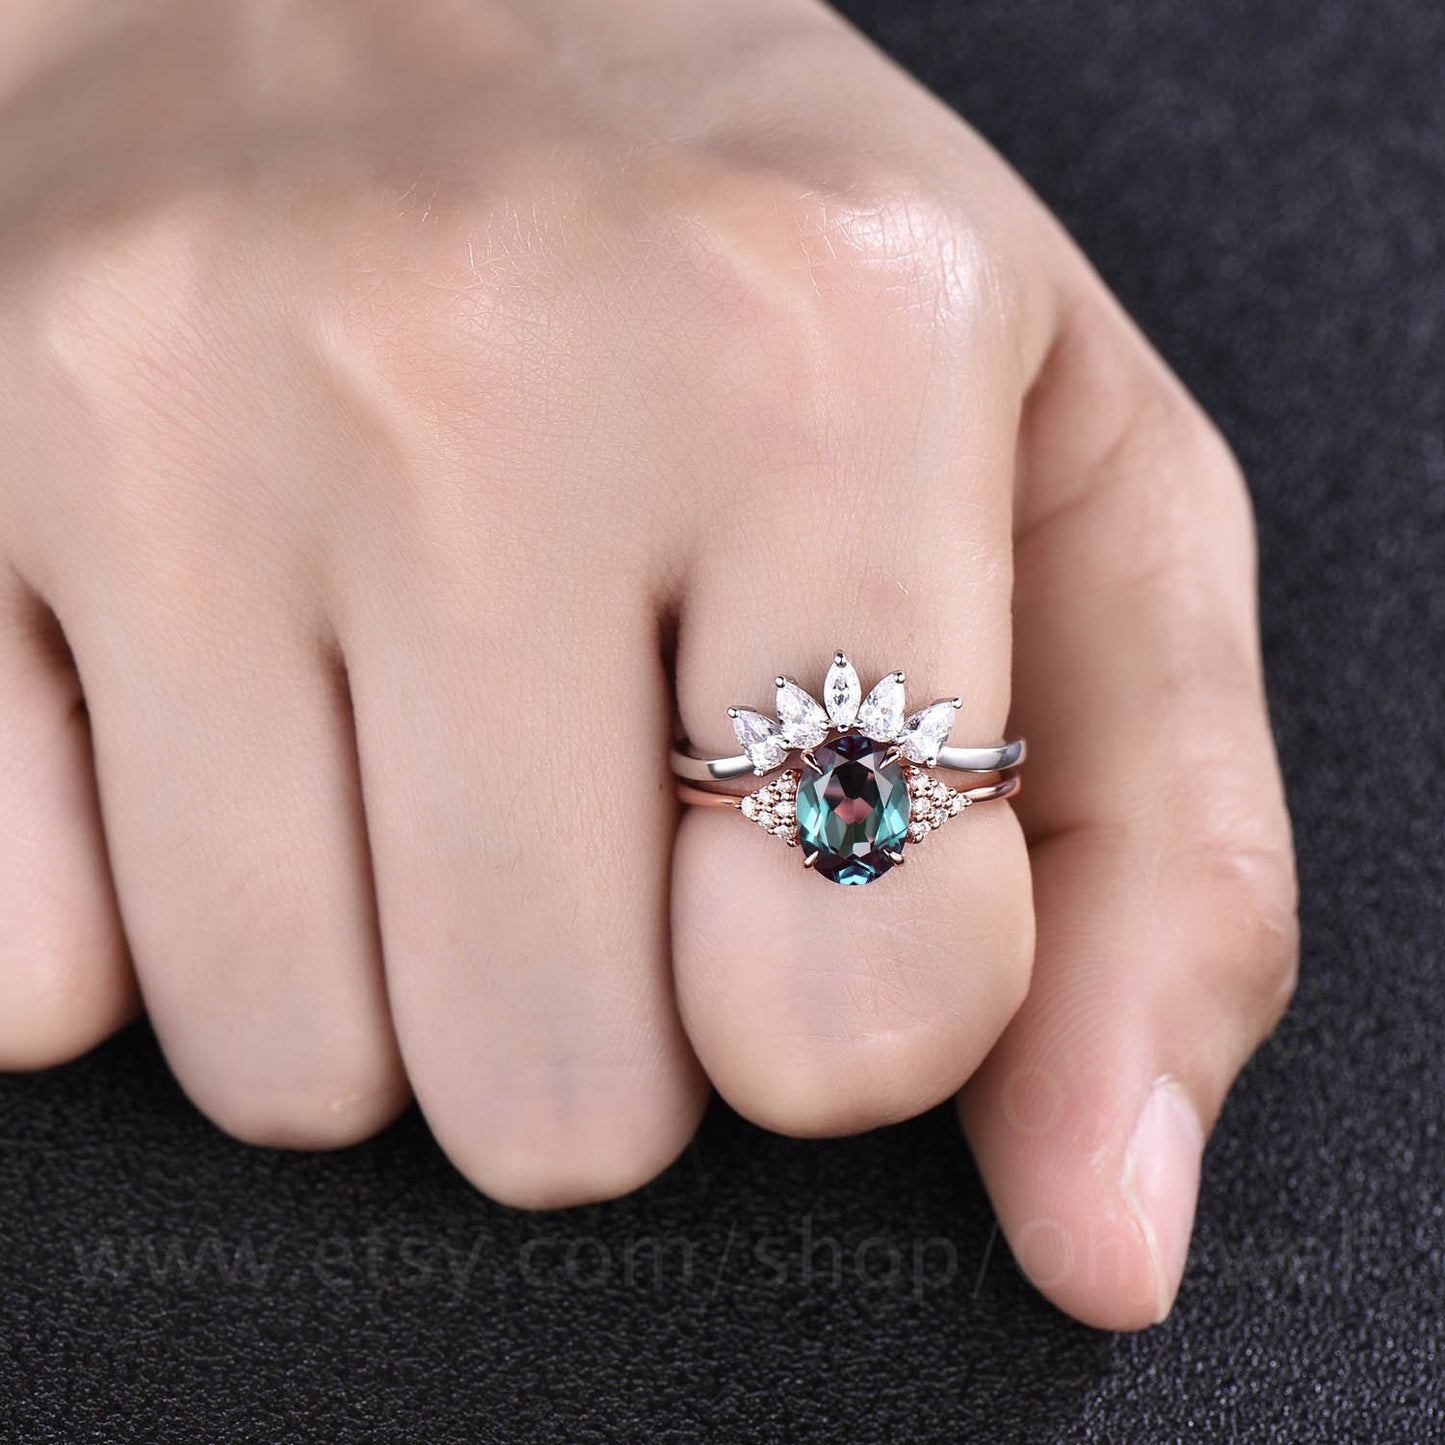 Alexandrite engagement ring five stone Alexandrite ring set vintage rose gold for women marquise pear shaped moissanite wedding ring band